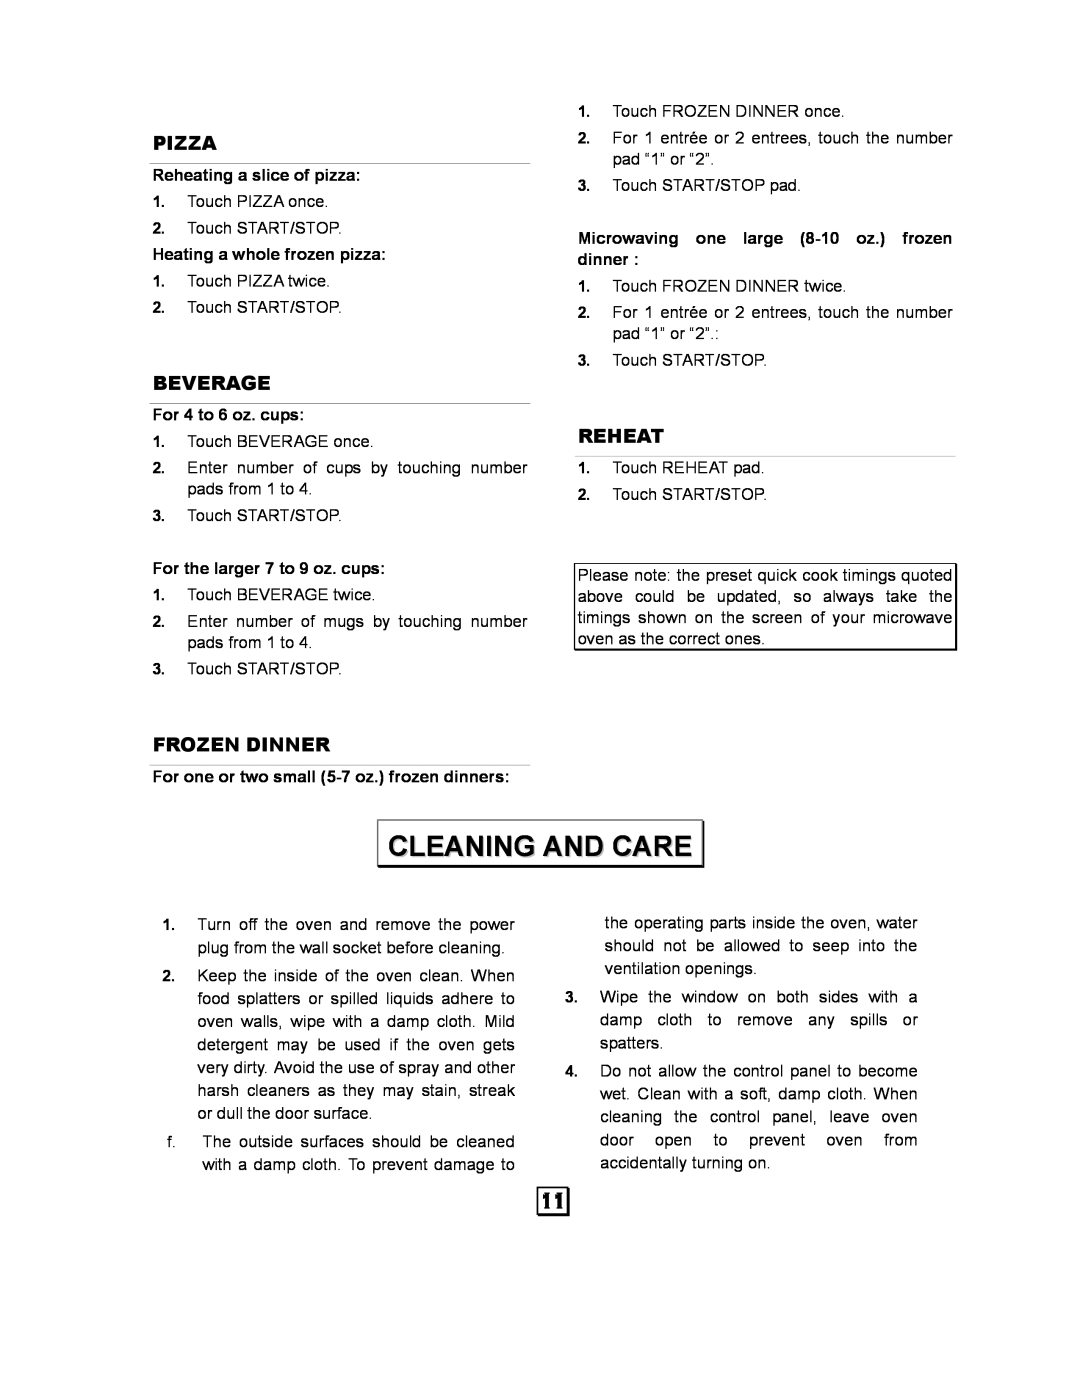 Kenmore 87090 owner manual Cleaning And Care, Pizza, Beverage, Reheat, Frozen Dinner 